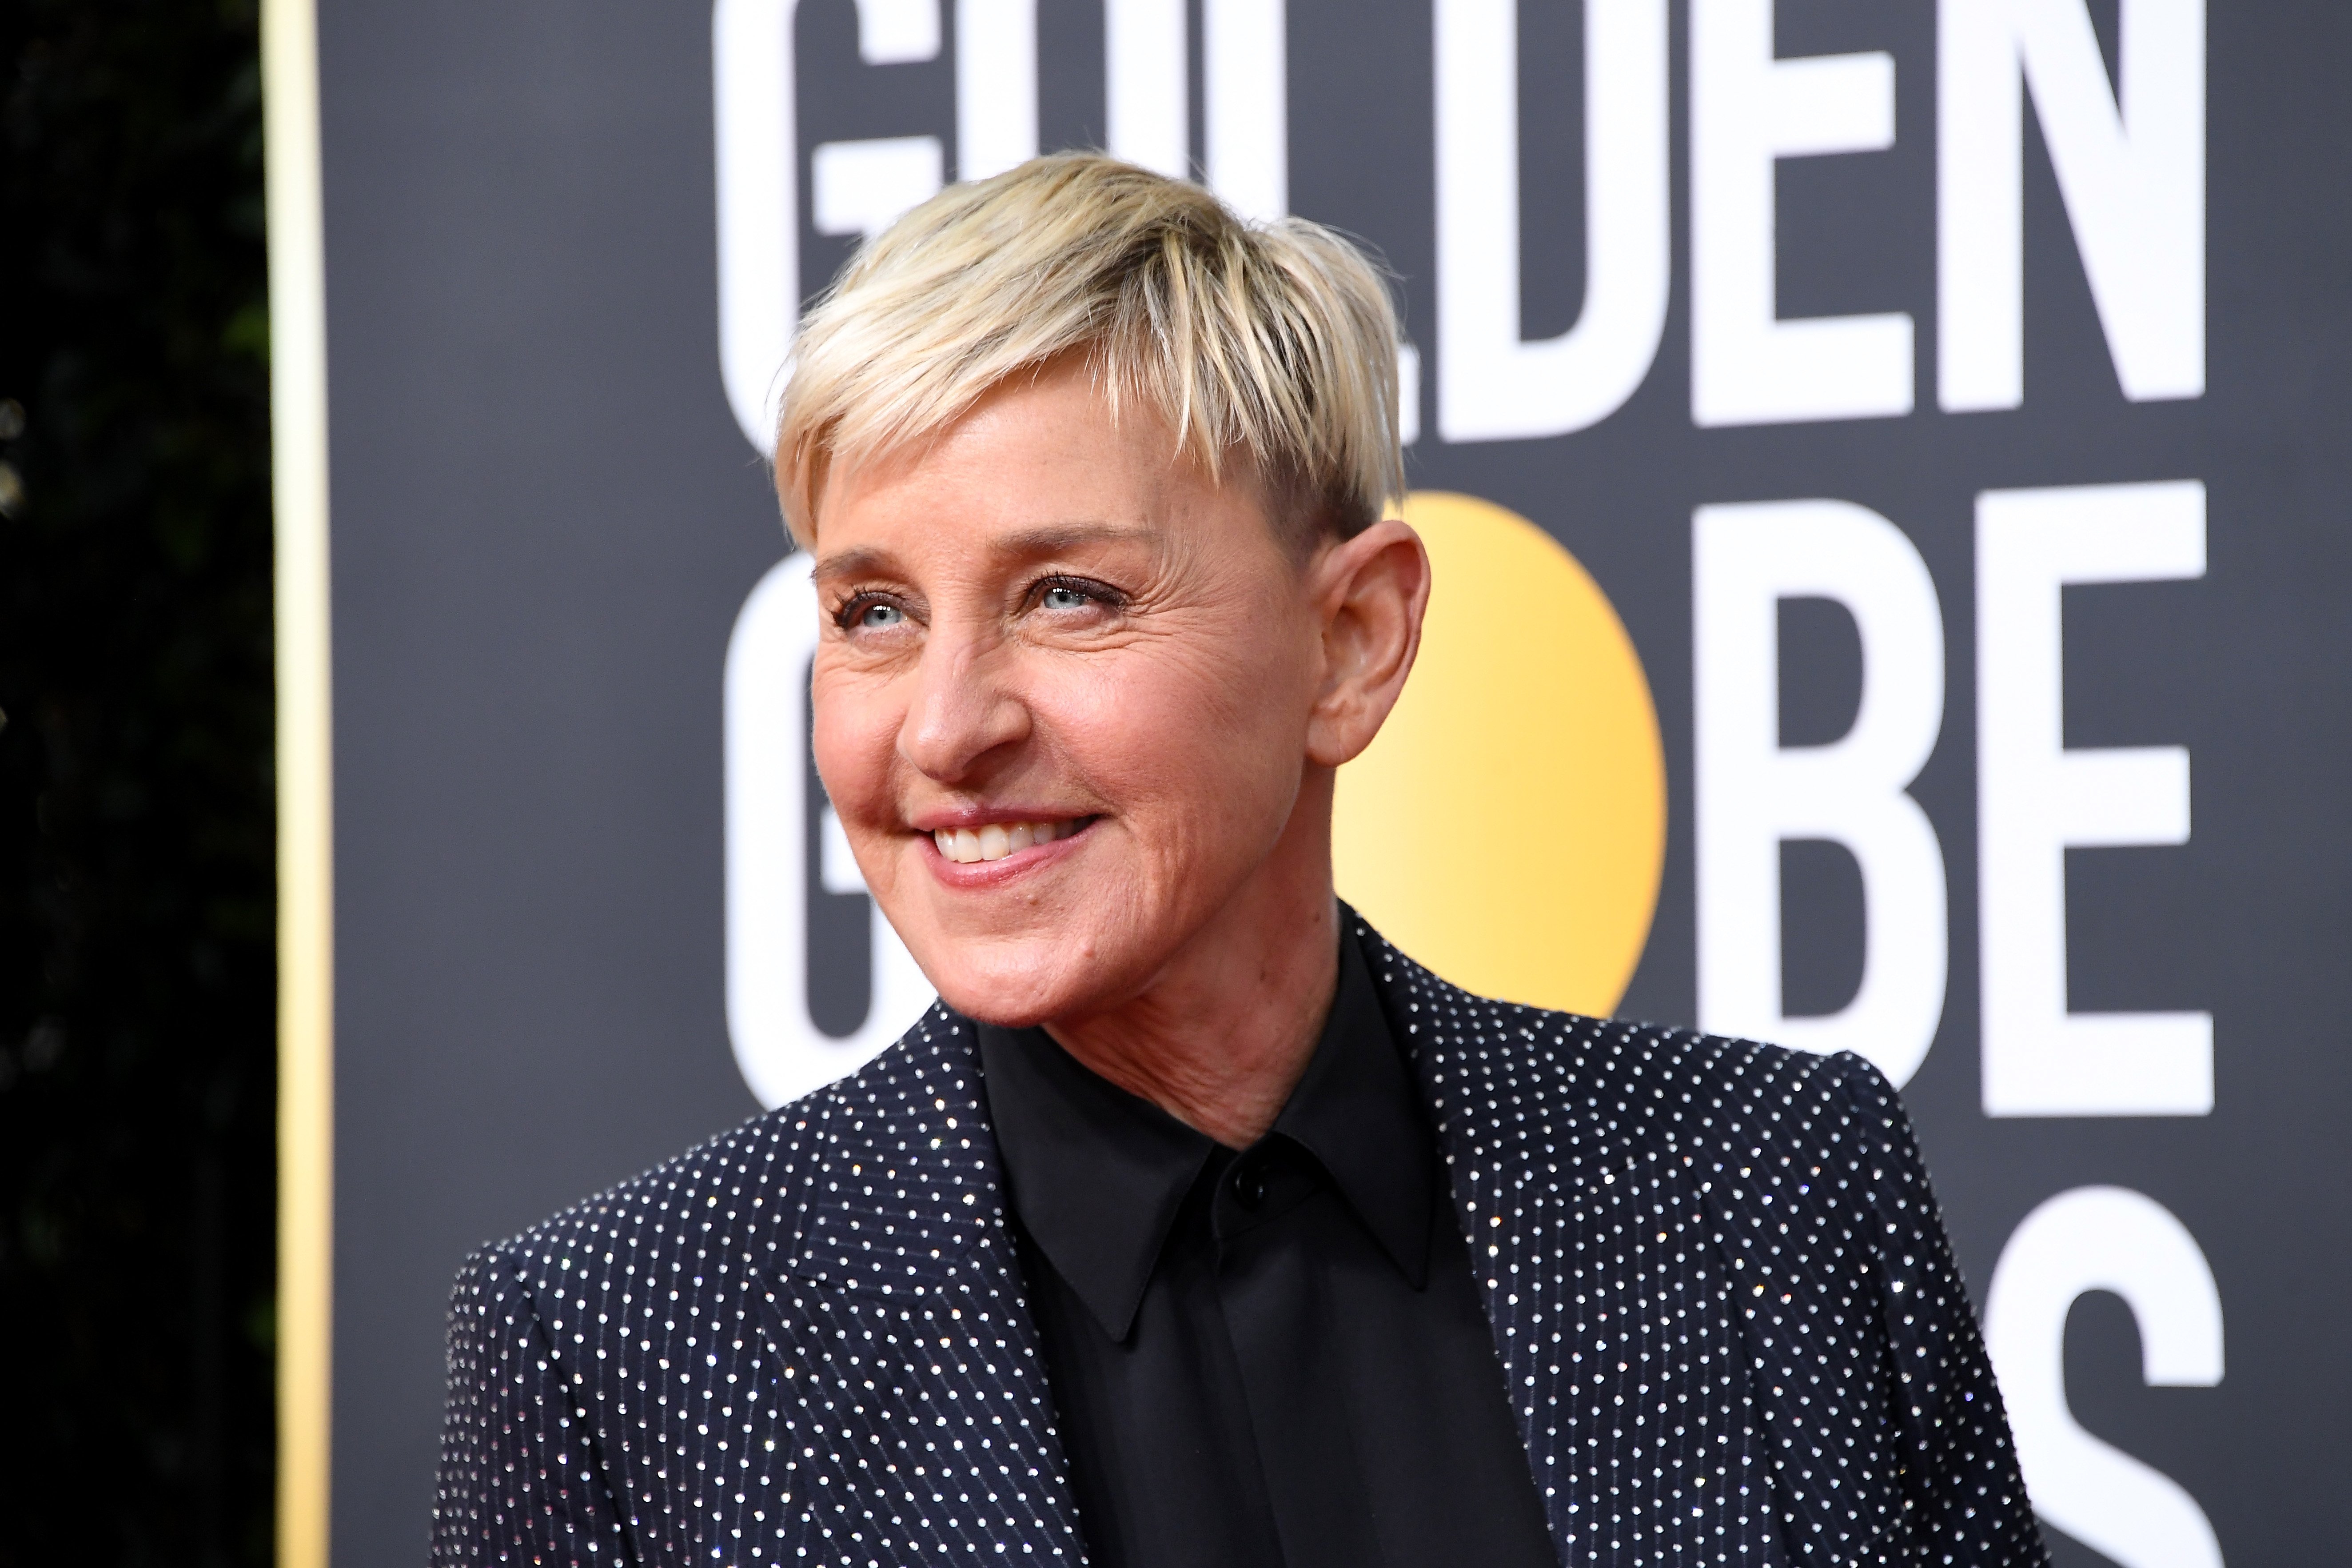 Ellen DeGeneres attends the 77th Annual Golden Globe Awards on January 05, 2020 | Photo: Getty Images